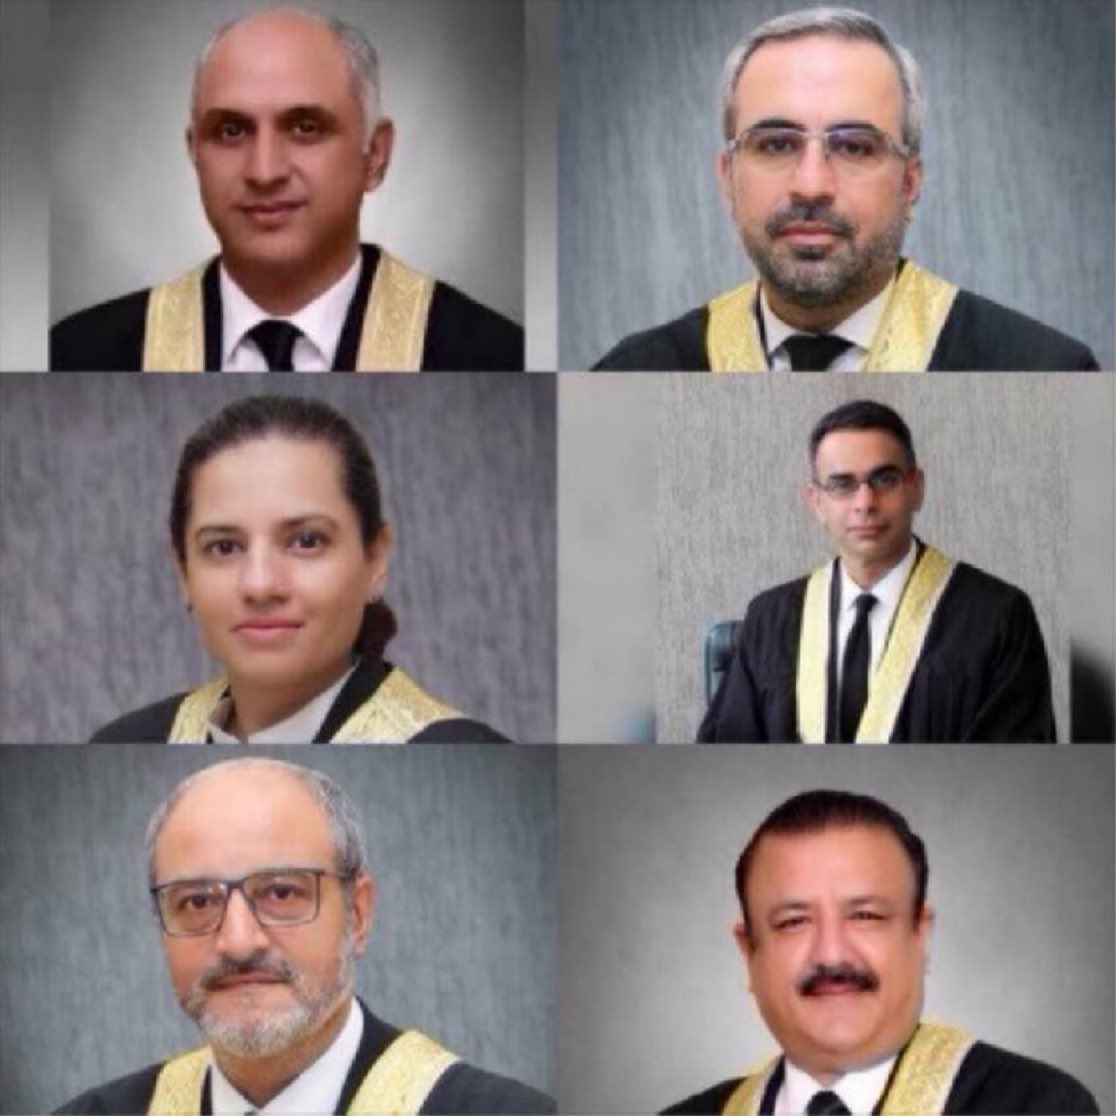 The brave judges are standing strong. May Almighty grant them more power for providing justice. 
#IslamabadHighCourt 
#قوم_مانگے_خان_کی_رہائی